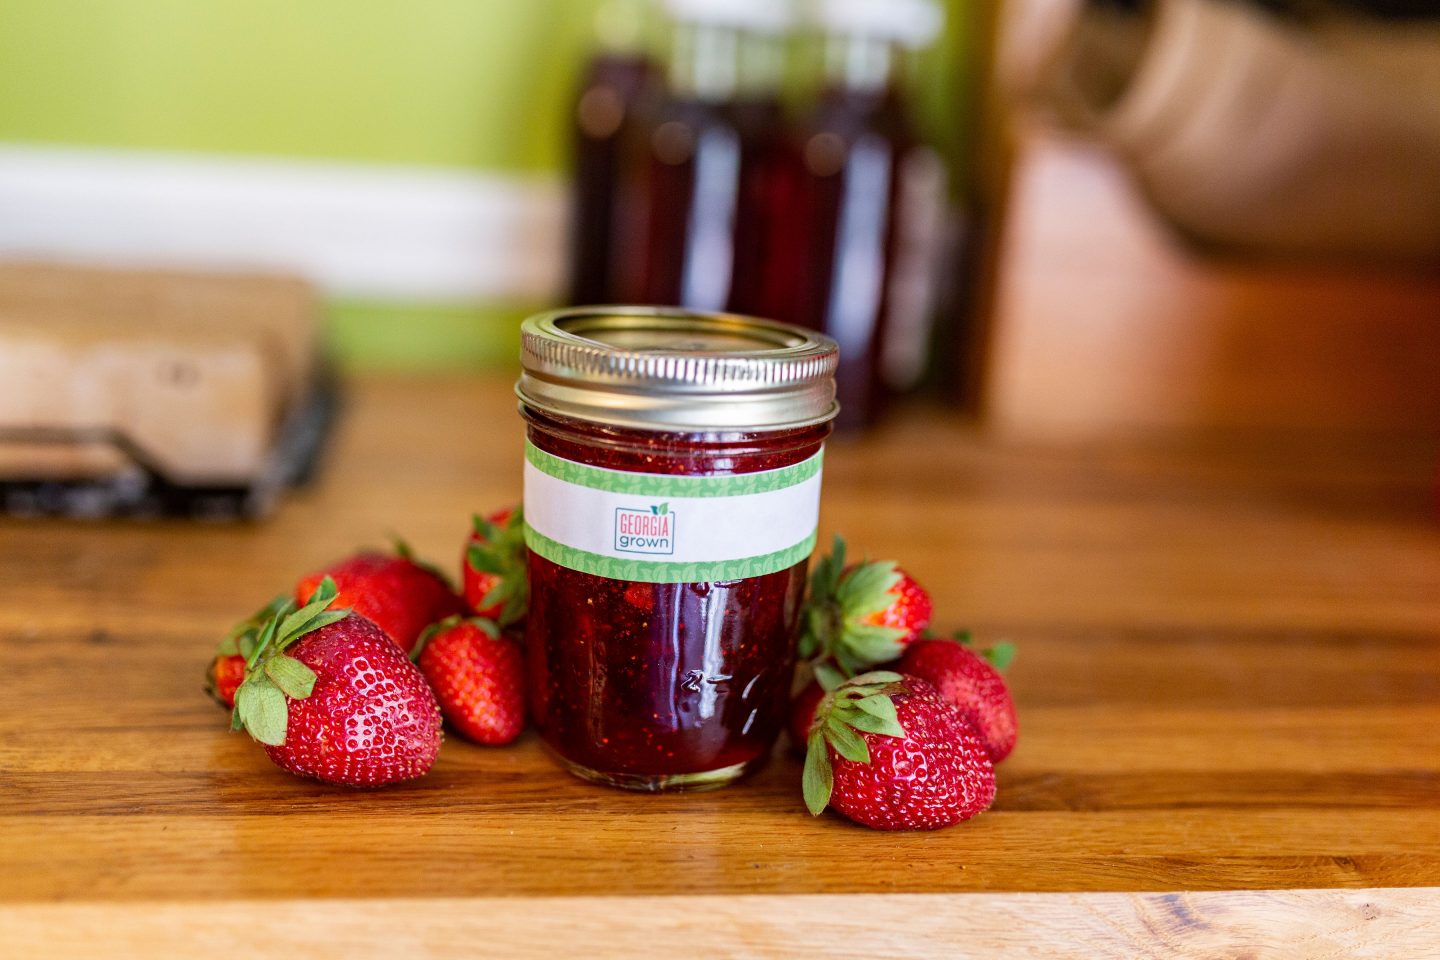 Want your to enjoy your fresh strawberries year round? Follow these easy steps on making your own homemade strawberry jam! #strawberryjam #canning #canningrecipe #surejell #jam